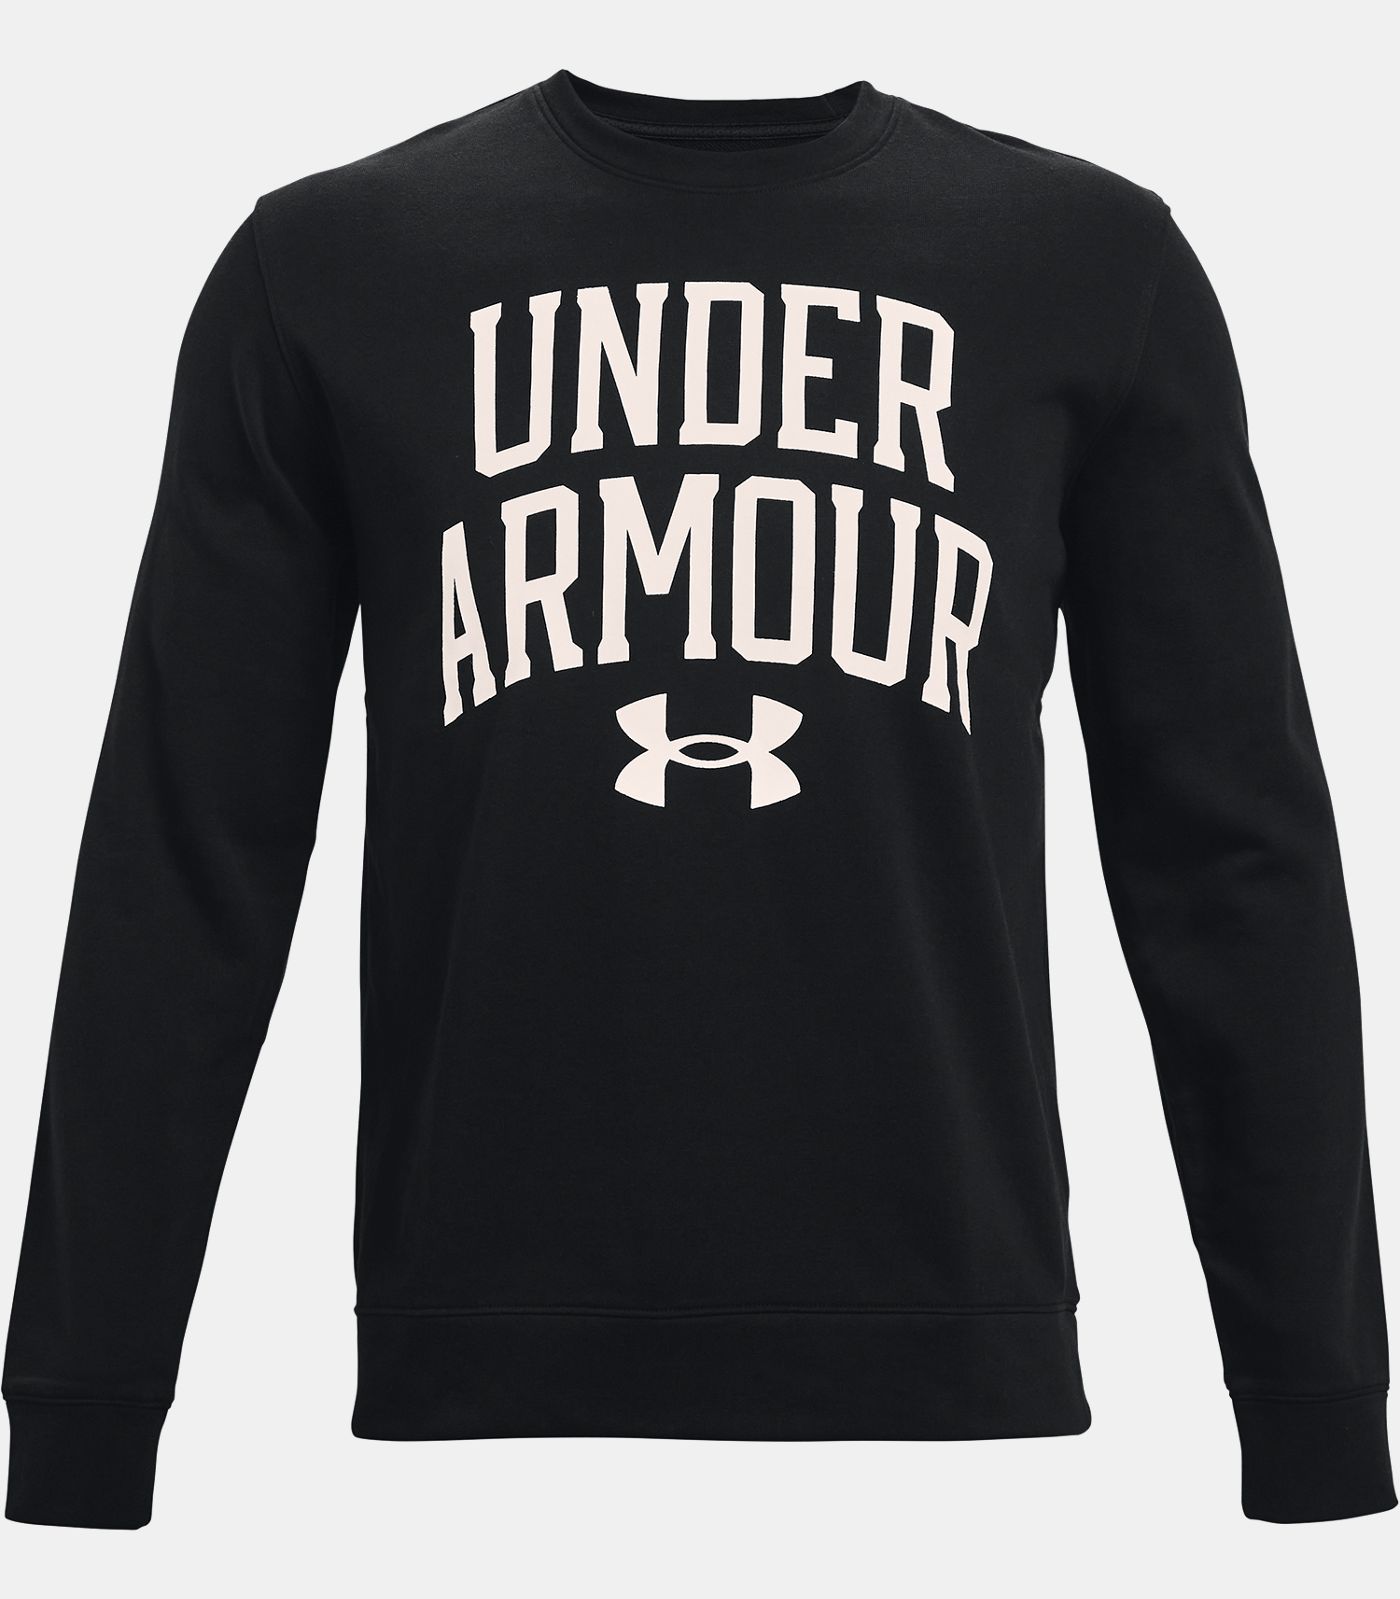 Under Armour Rival Terry Men's T Shirt